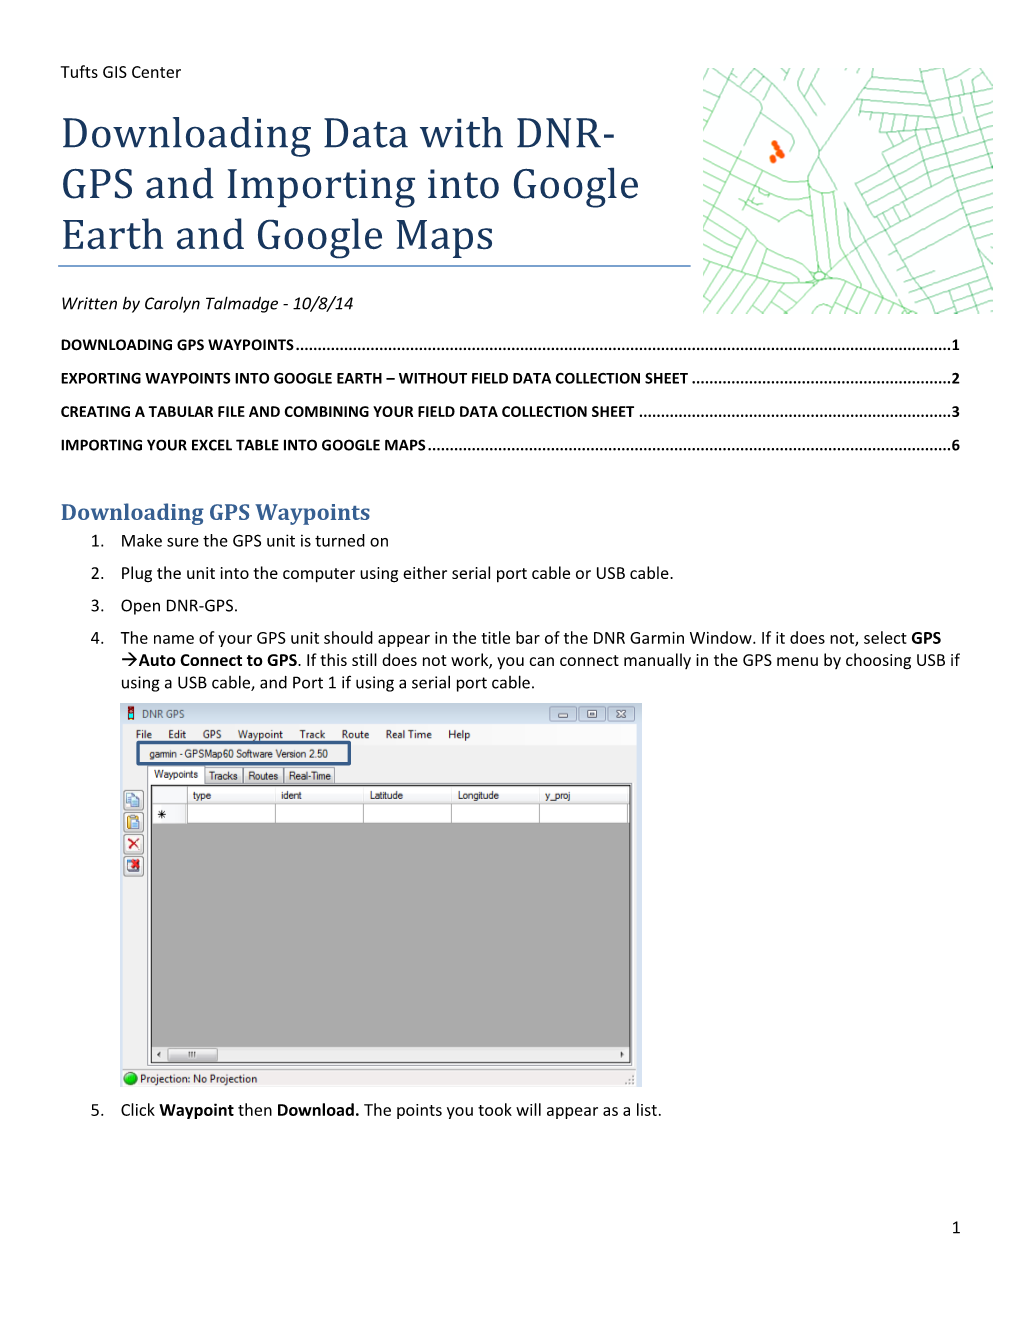 GPS and Importing Into Google Earth and Google Maps